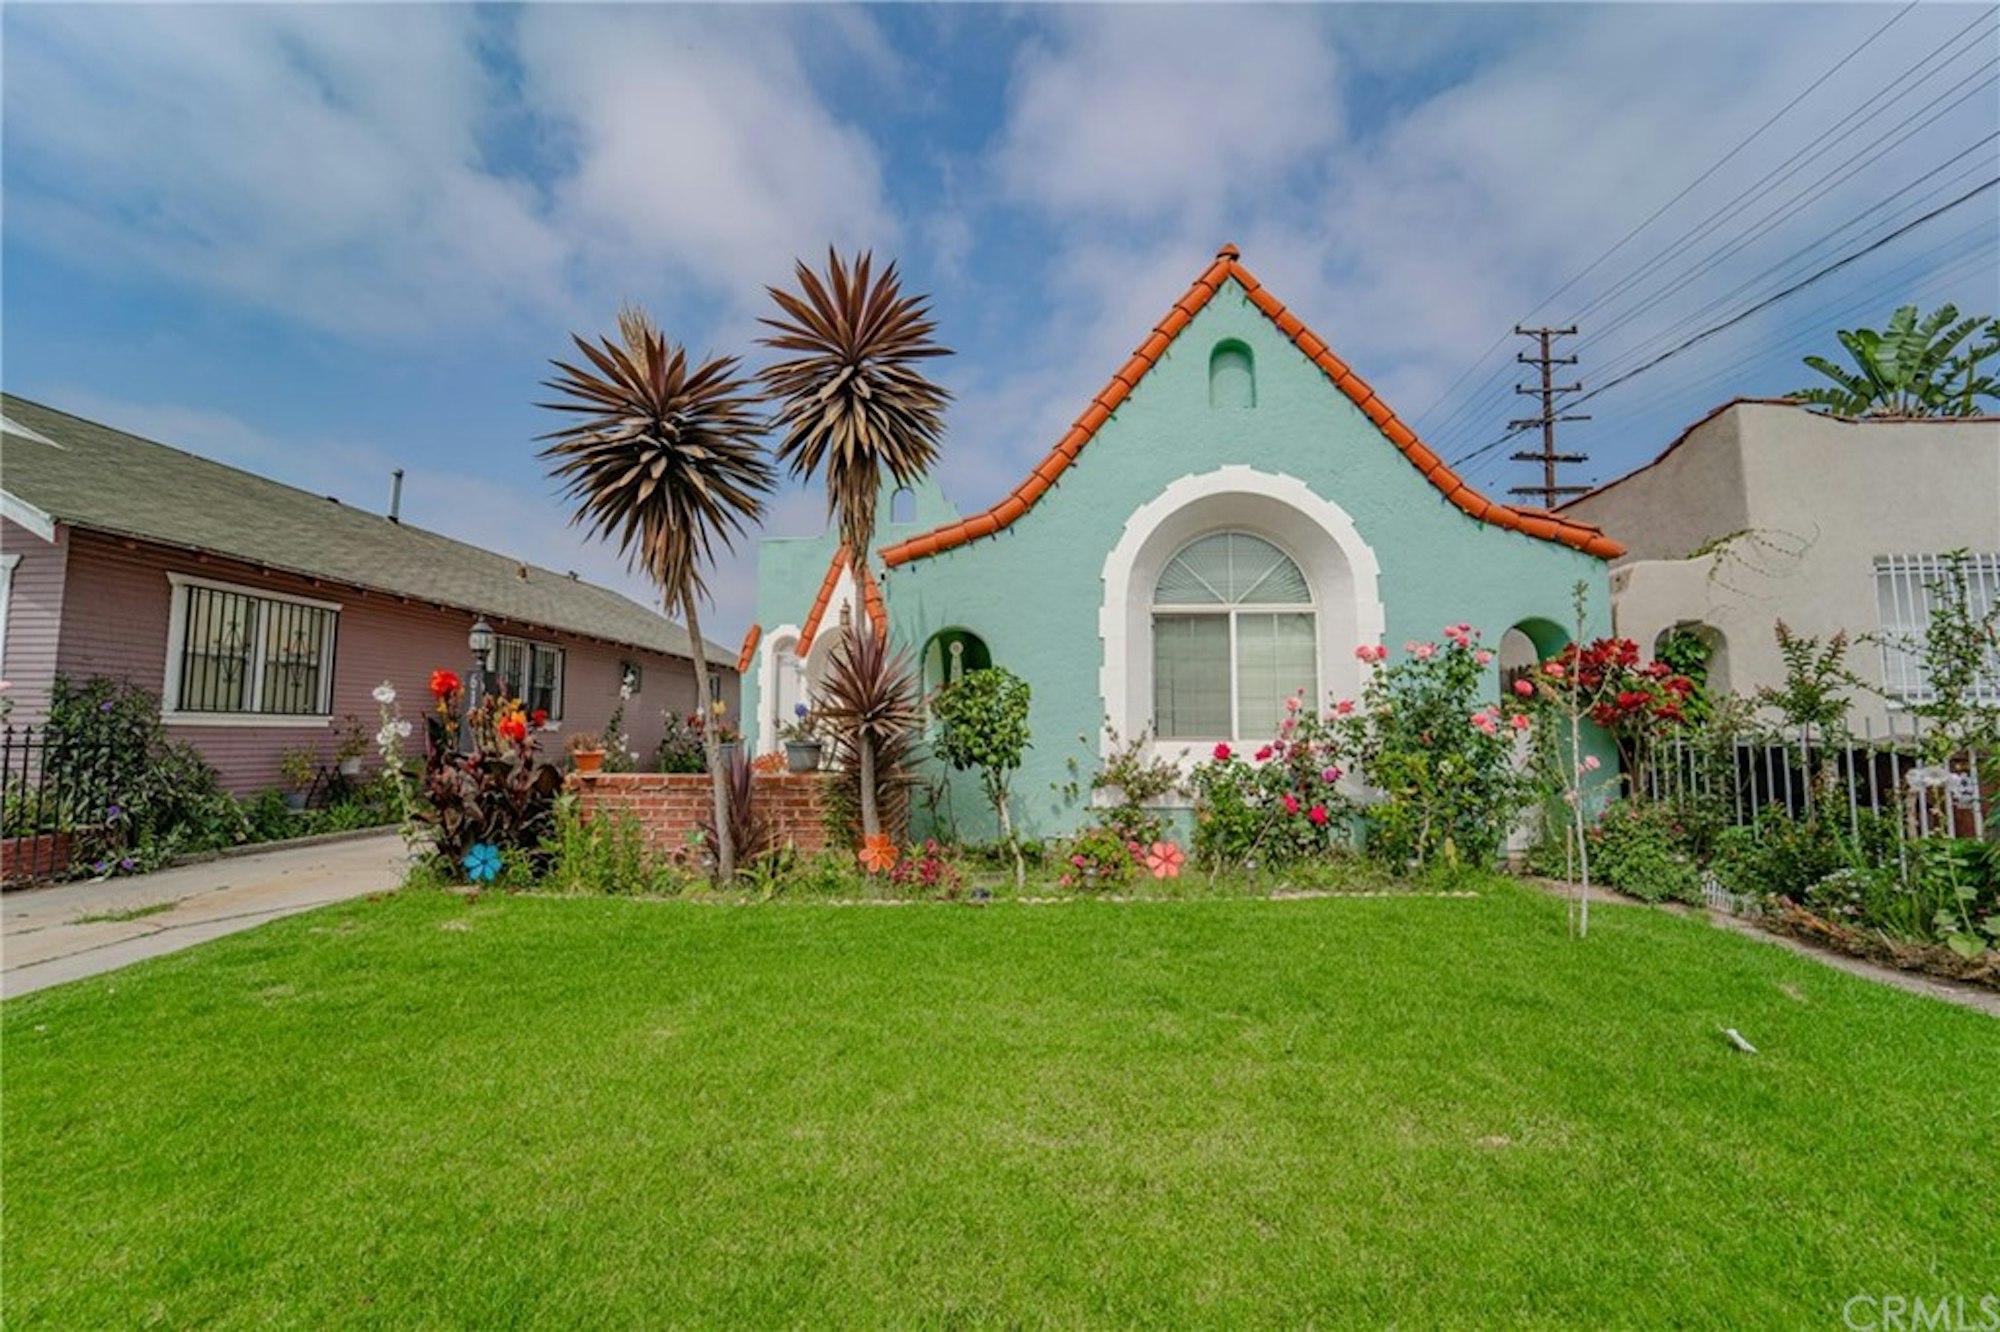 Photo 1 of 30 - 619 N Chester Ave, Compton, CA 90221